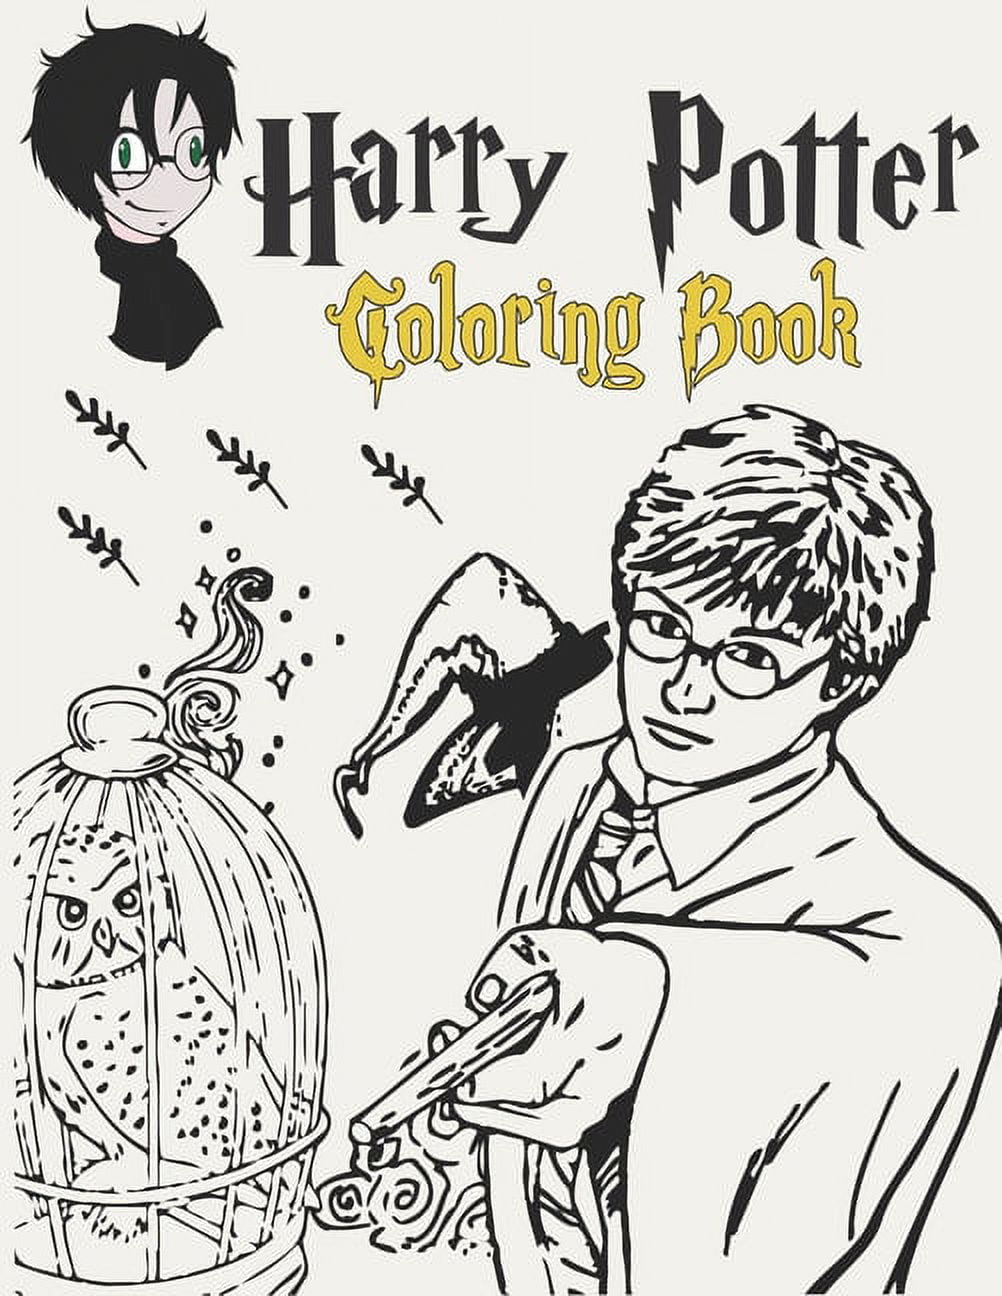 Harry-Potter Coloring Book : Magical Places And Characters Perfect Coloring  Book For Kids And Adults The Best Way To Relax And Relieve Stress - Size